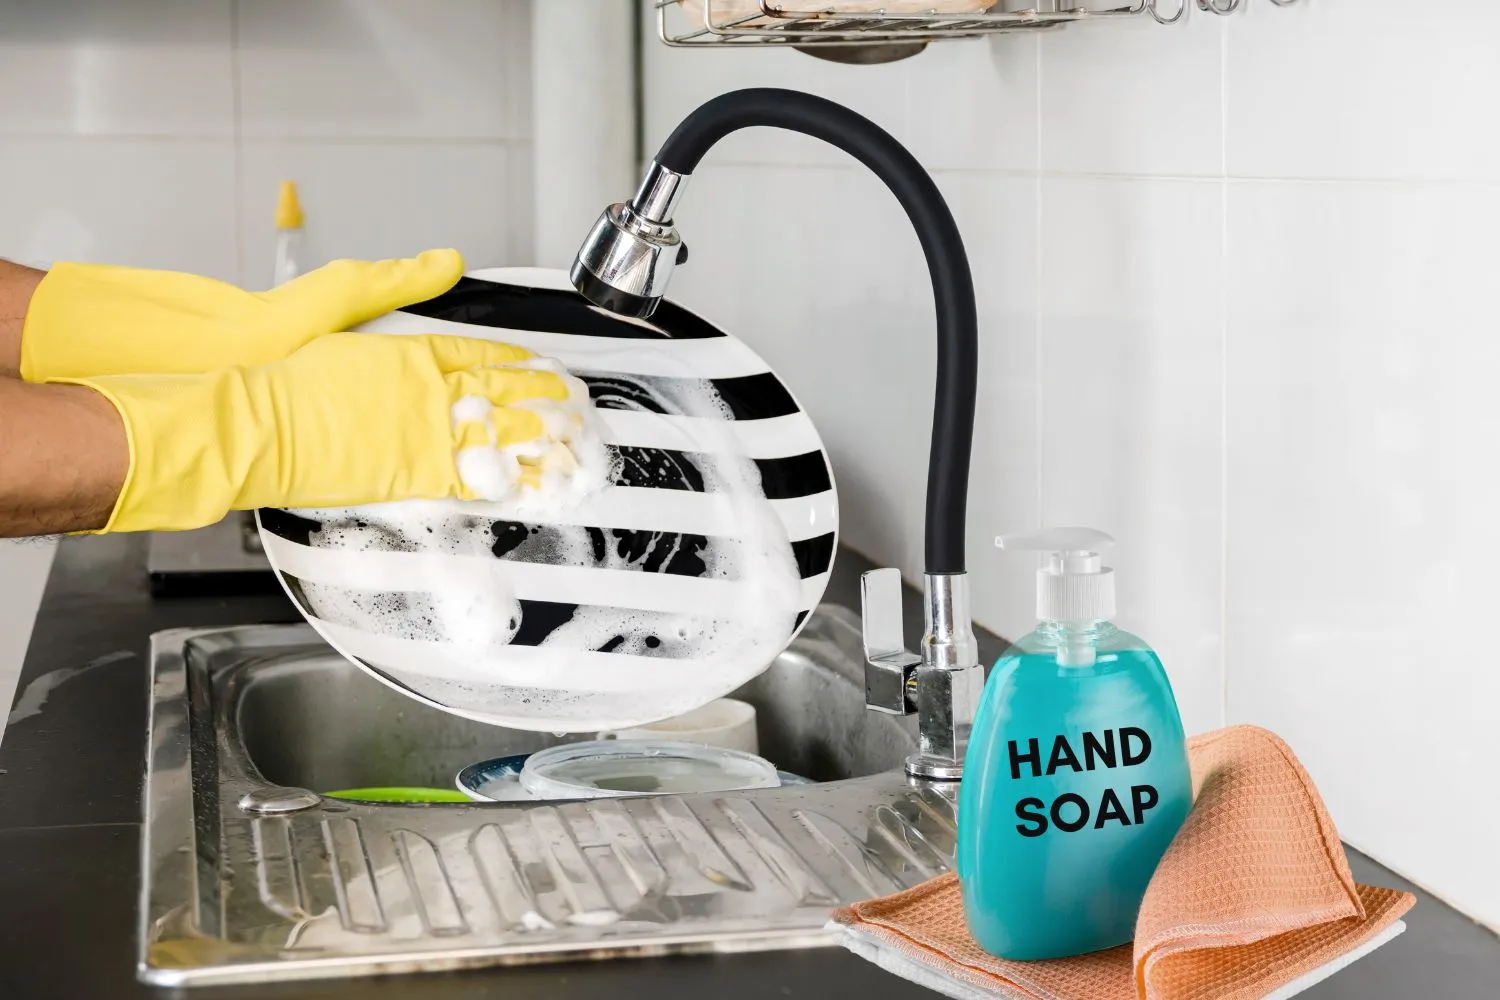 Is It OK To Wash Dishes With Hand Soap?